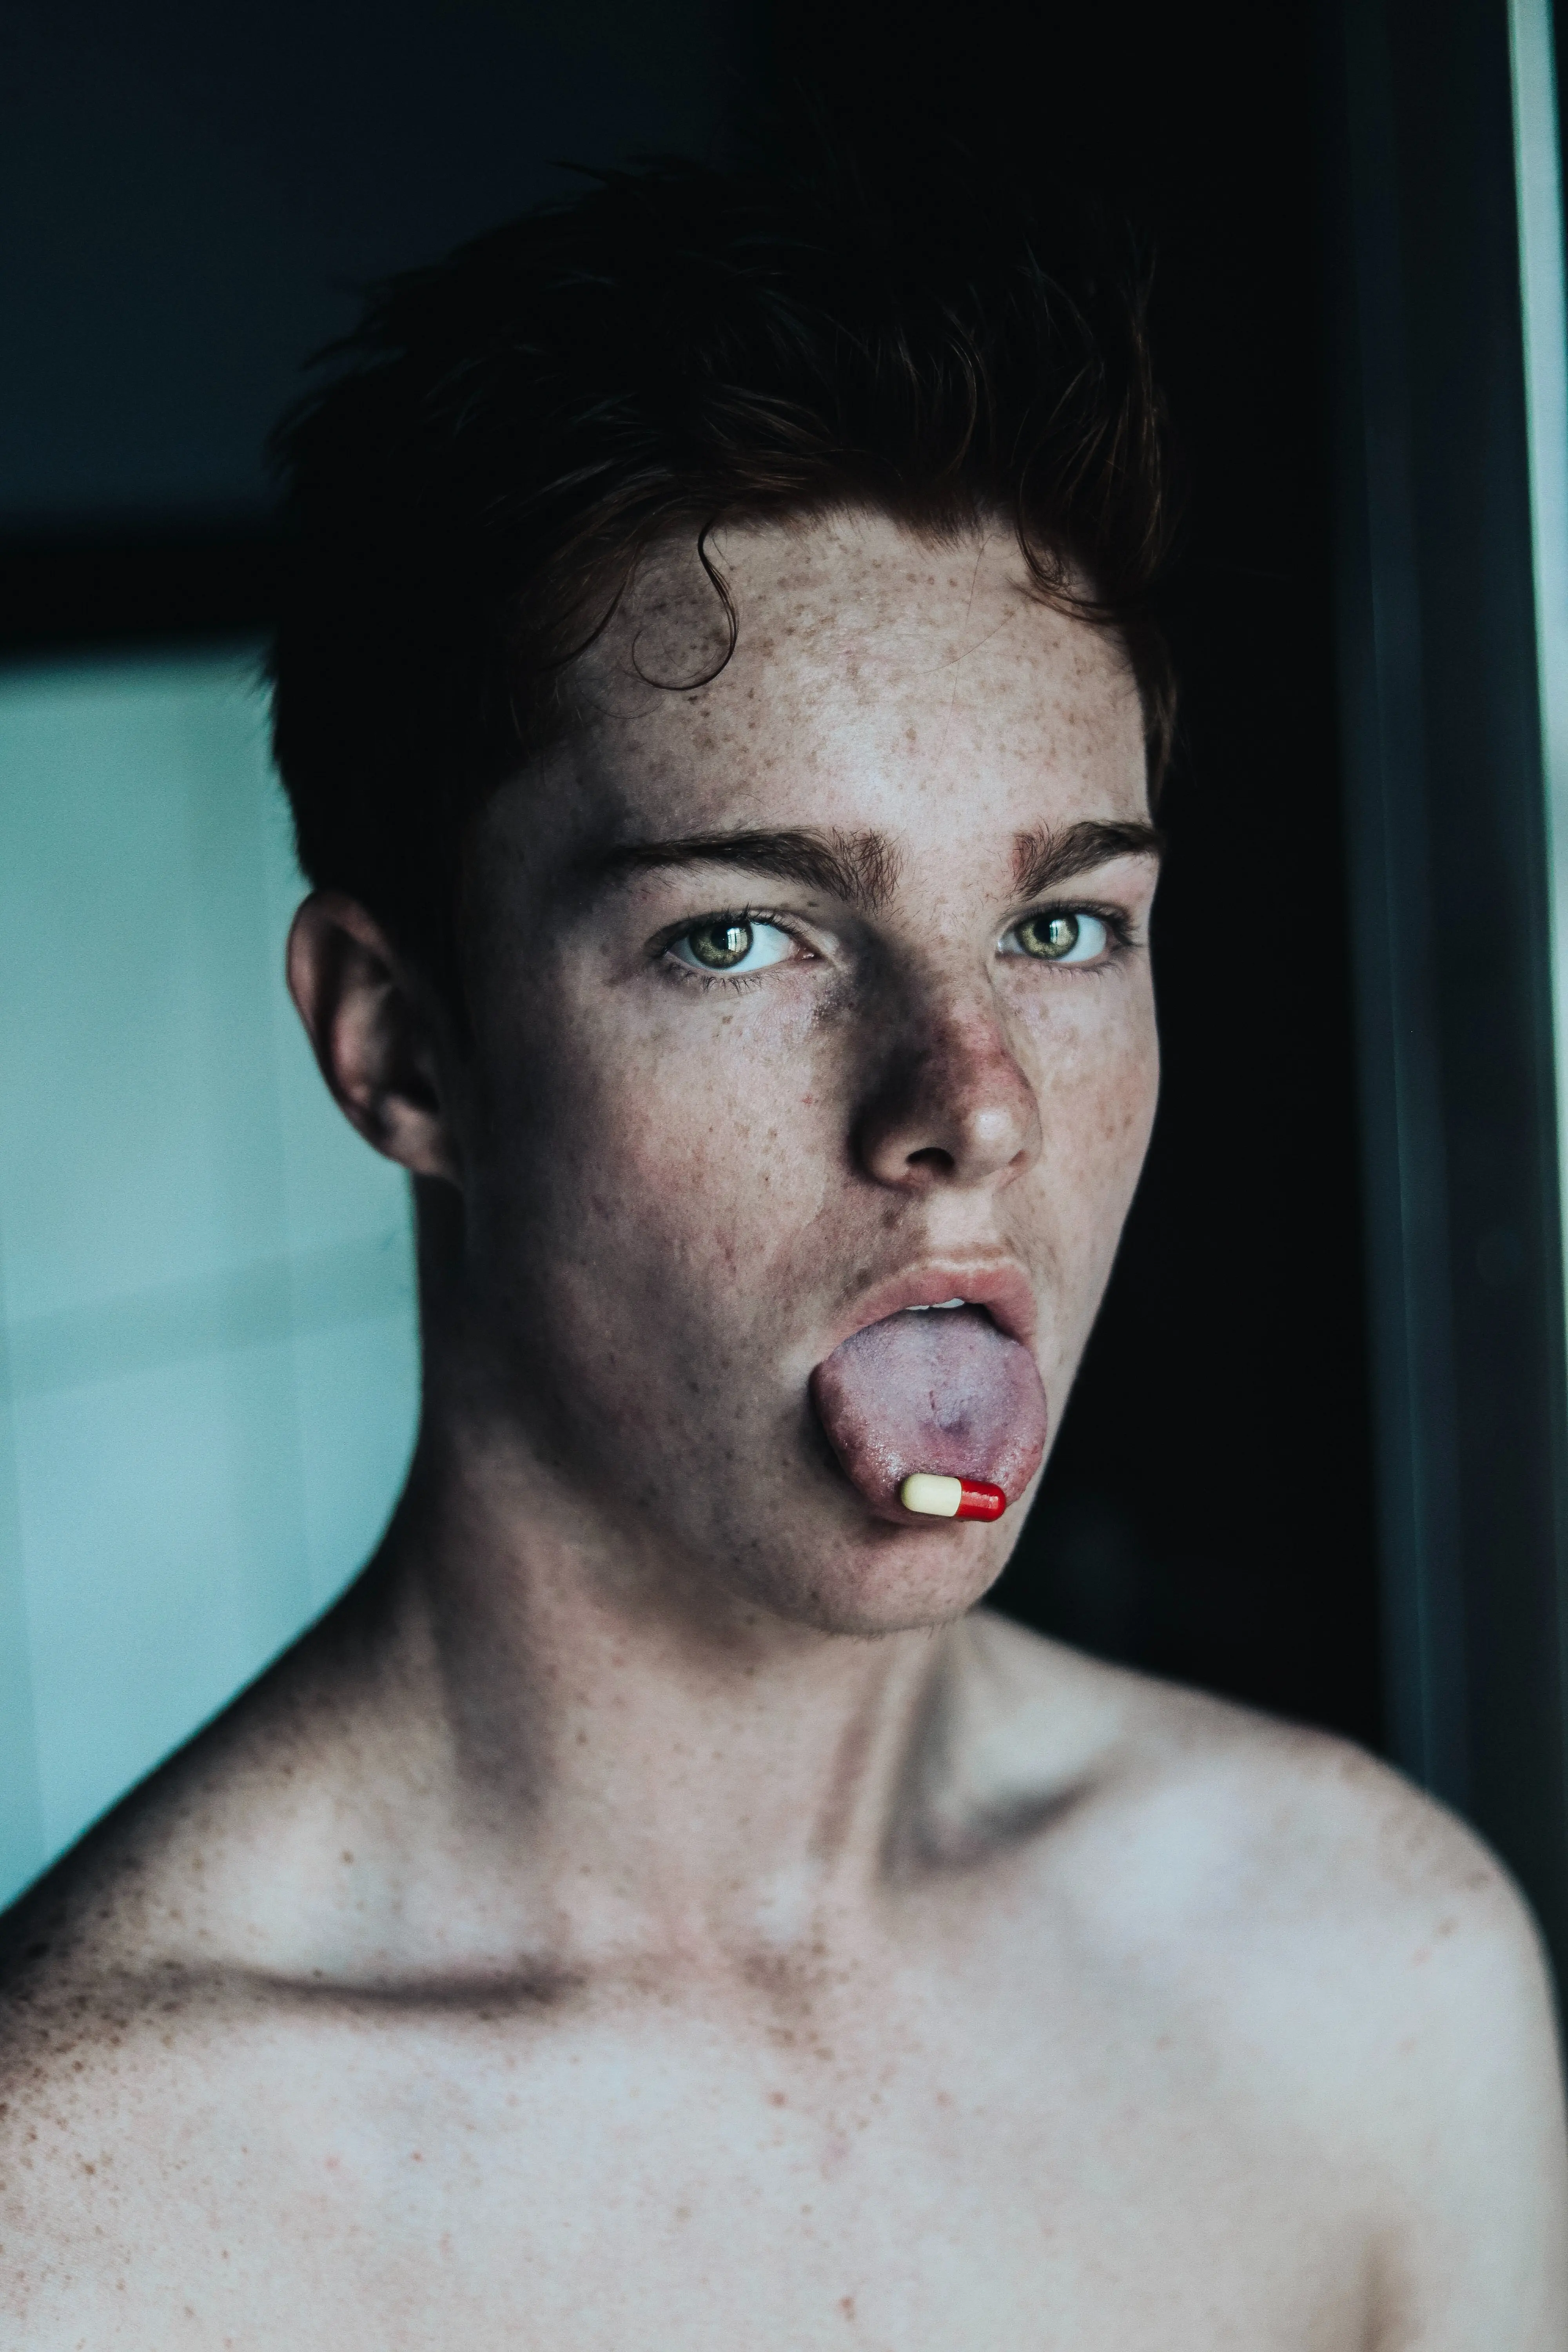 Topless man with a red and white pill on the tip of his tongue.